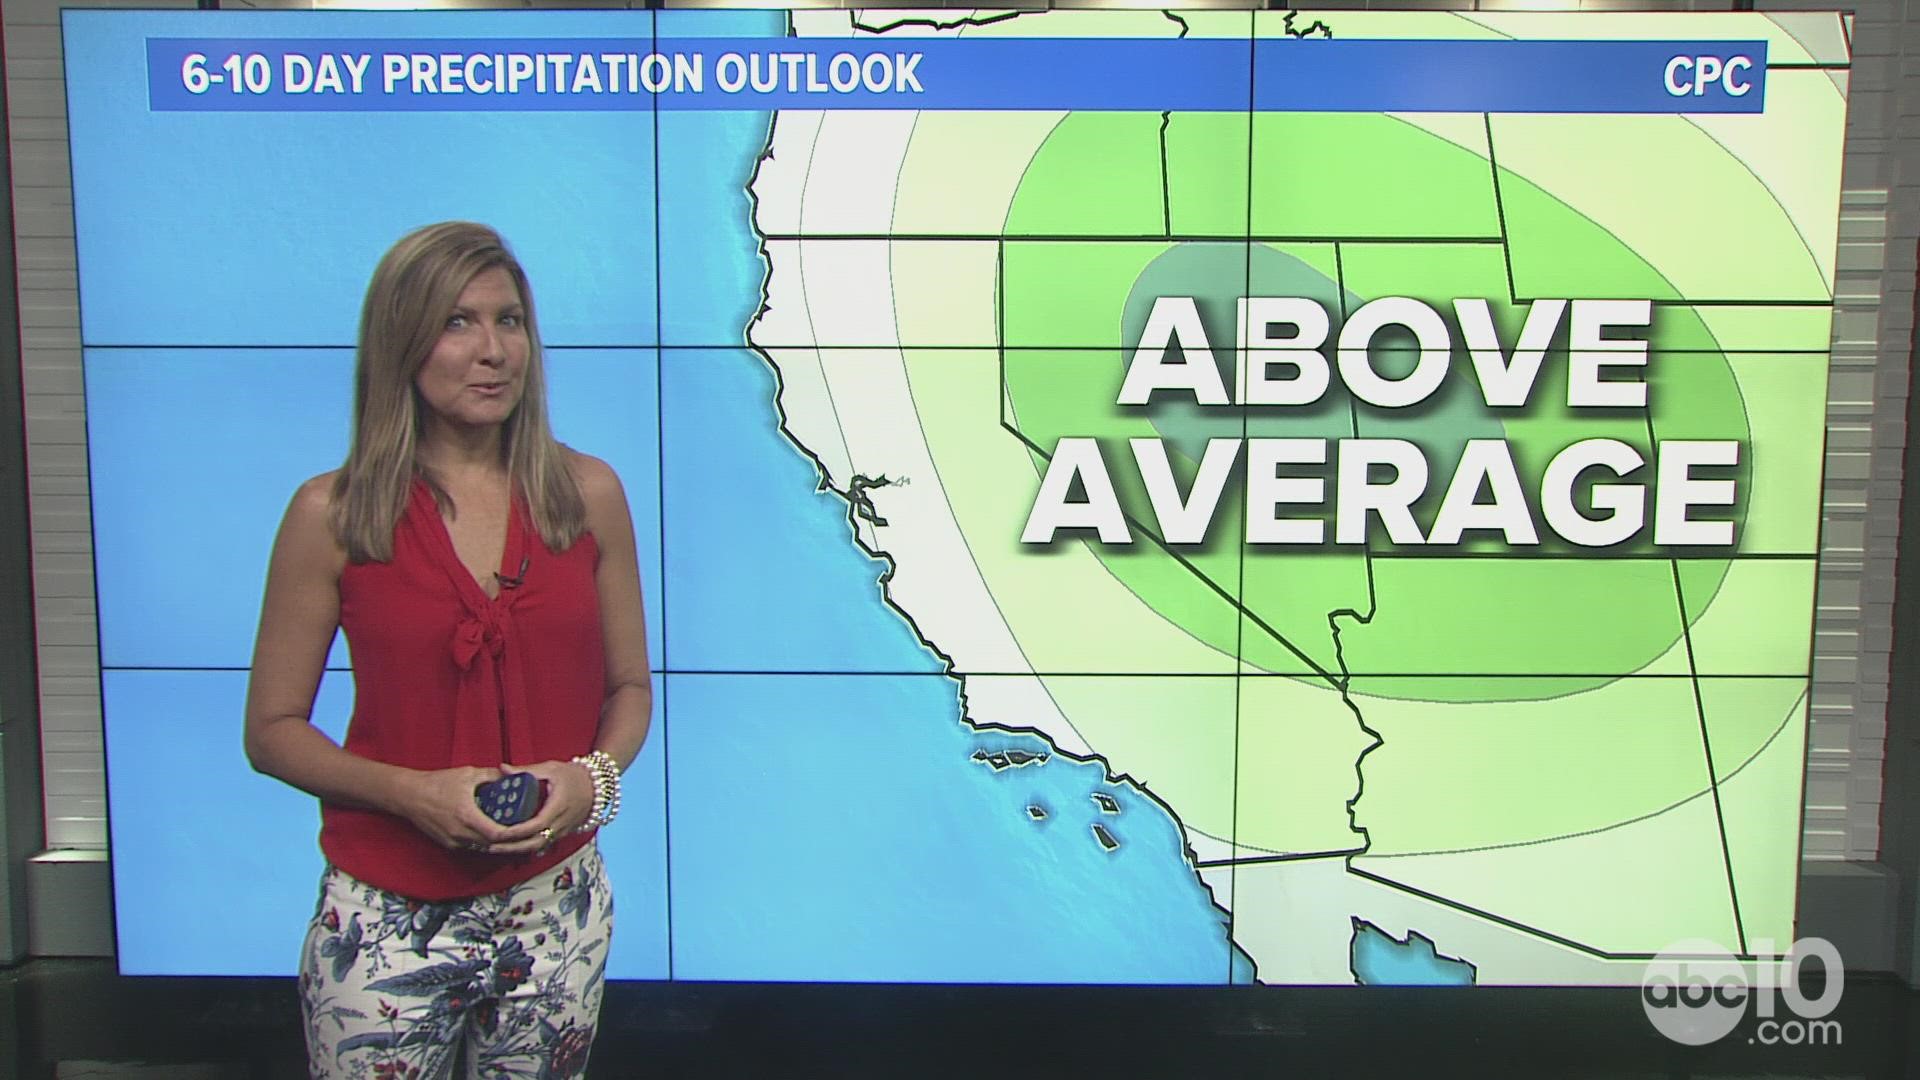 An active weather pattern will bring a chance of rare summer storms to the valley with thunderstorm chances continuing through the week in the Sierra.